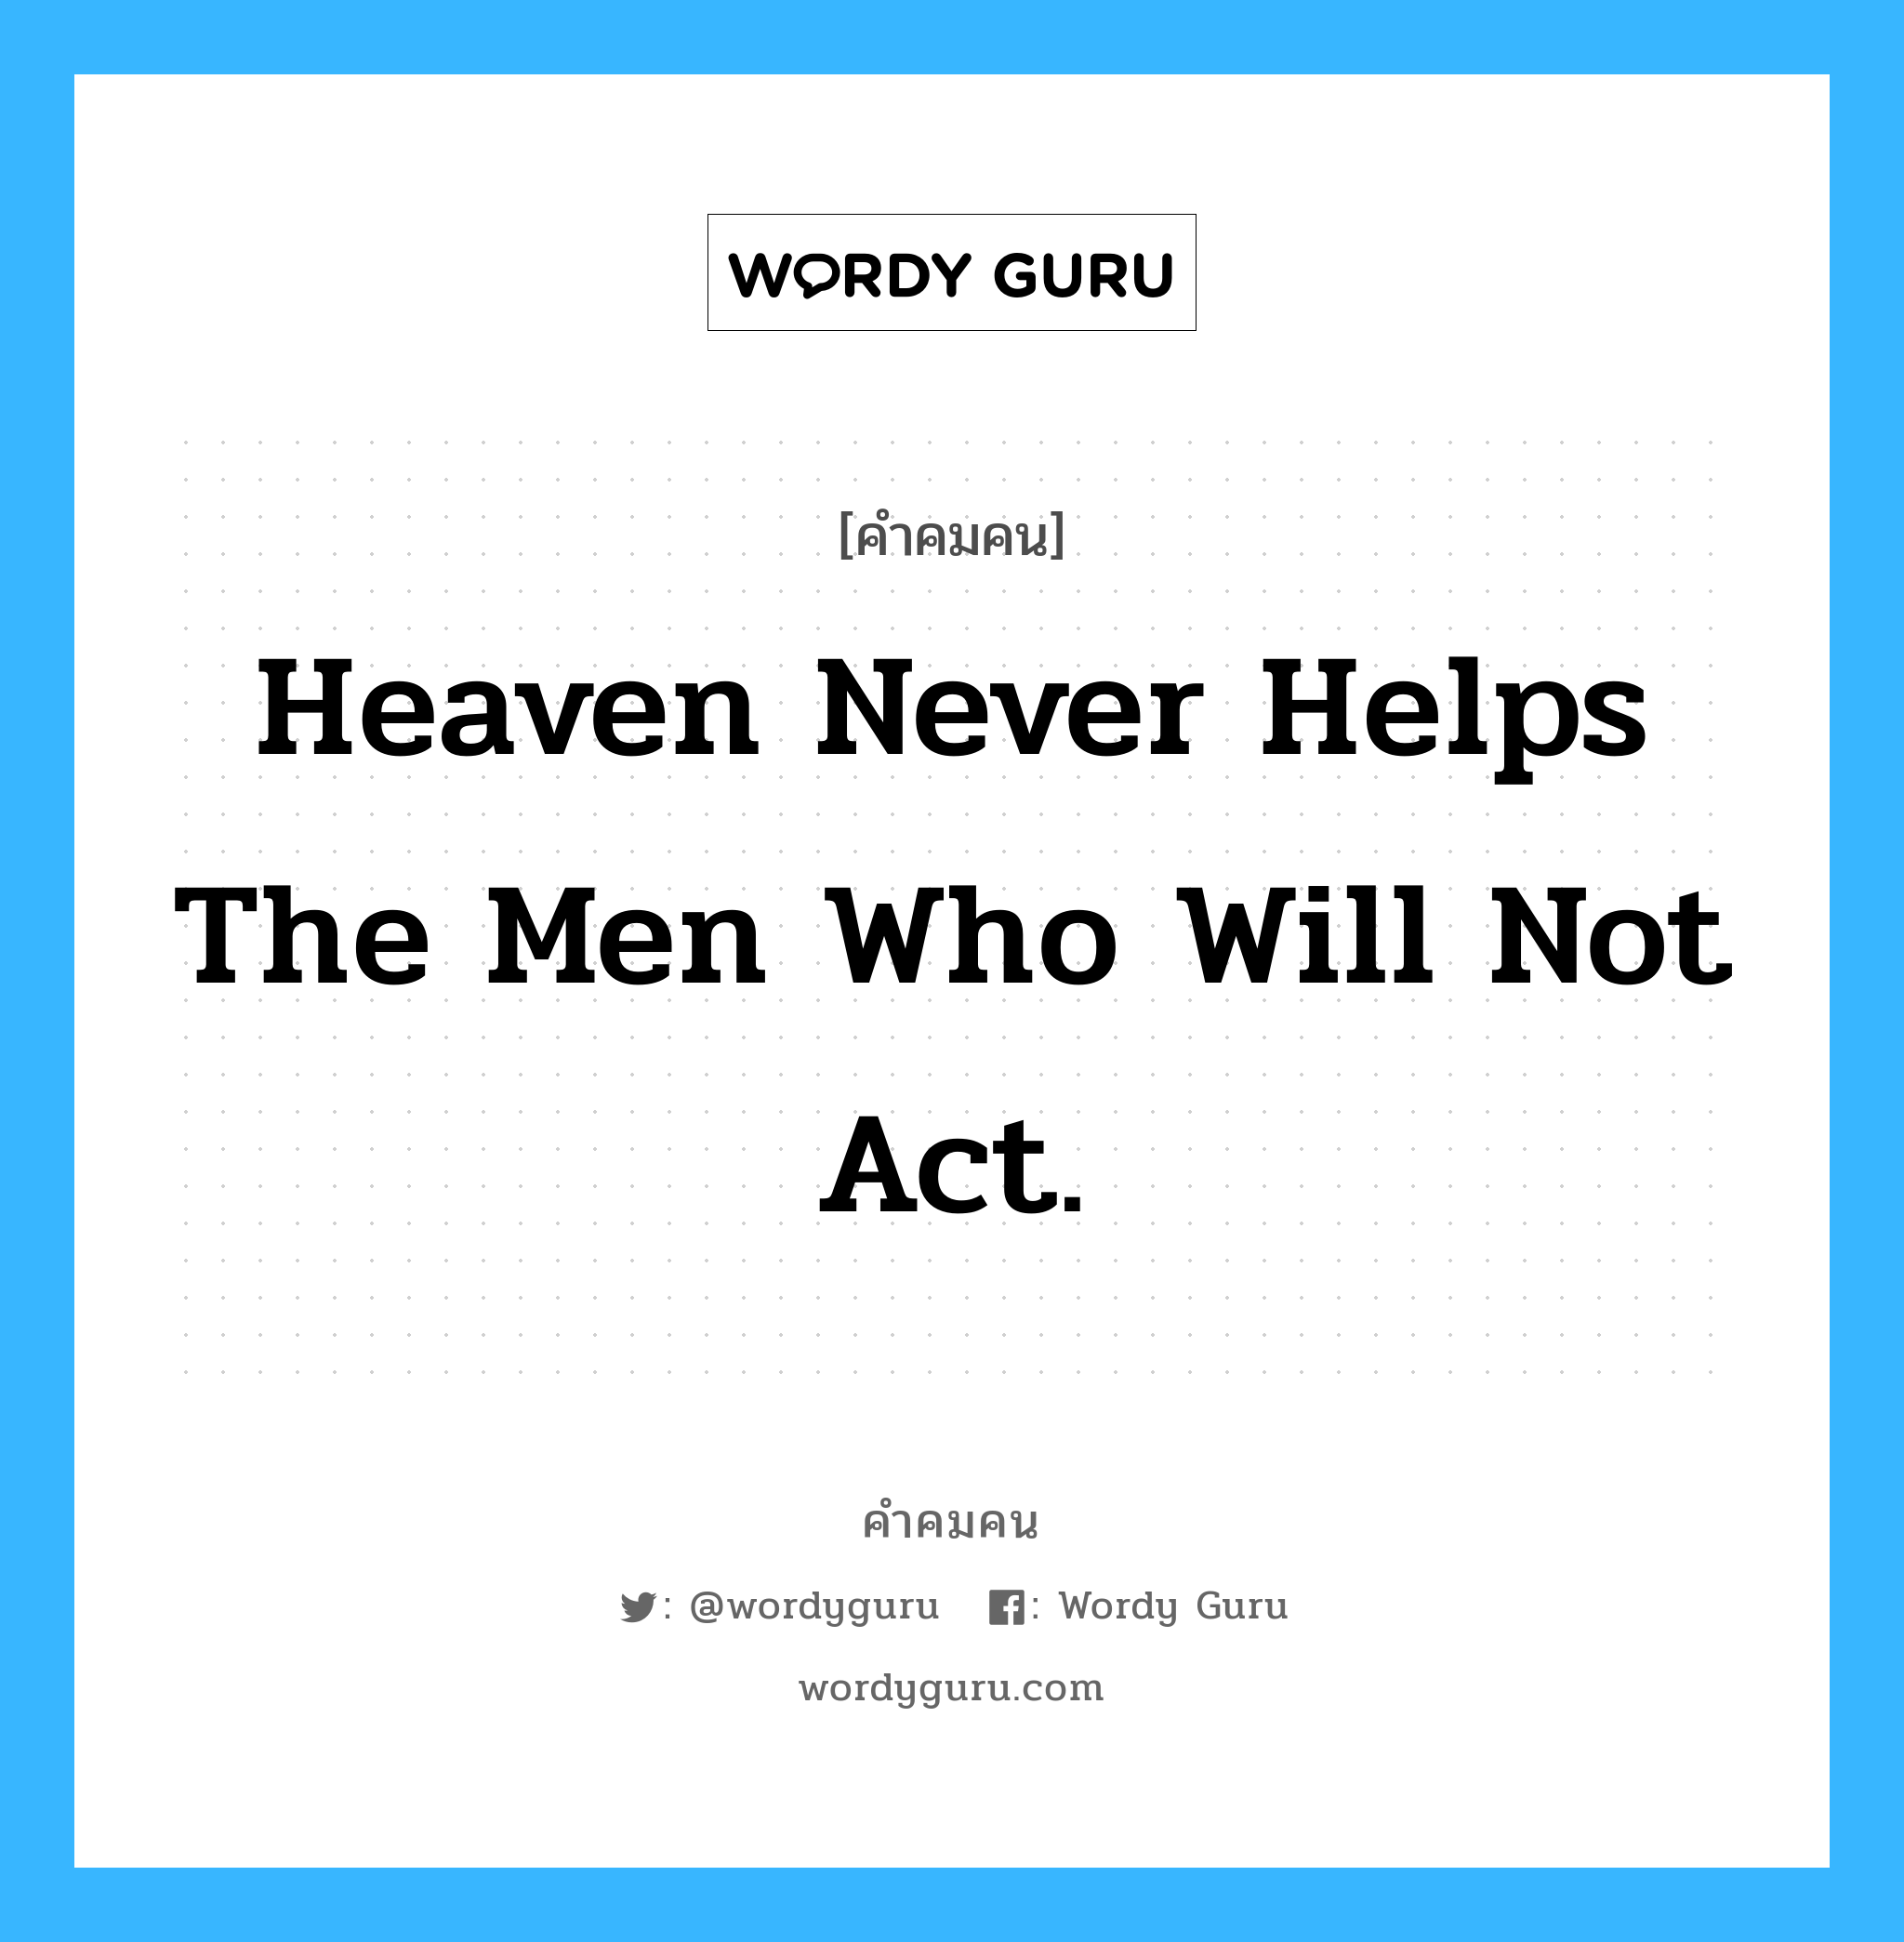 Heaven never helps the men who will not act., คำคมคน Heaven never helps the men who will not act. สวรรค์ไม่ช่วยคนเกียจคร้าน Henry Bergson หมวด Henry Bergson